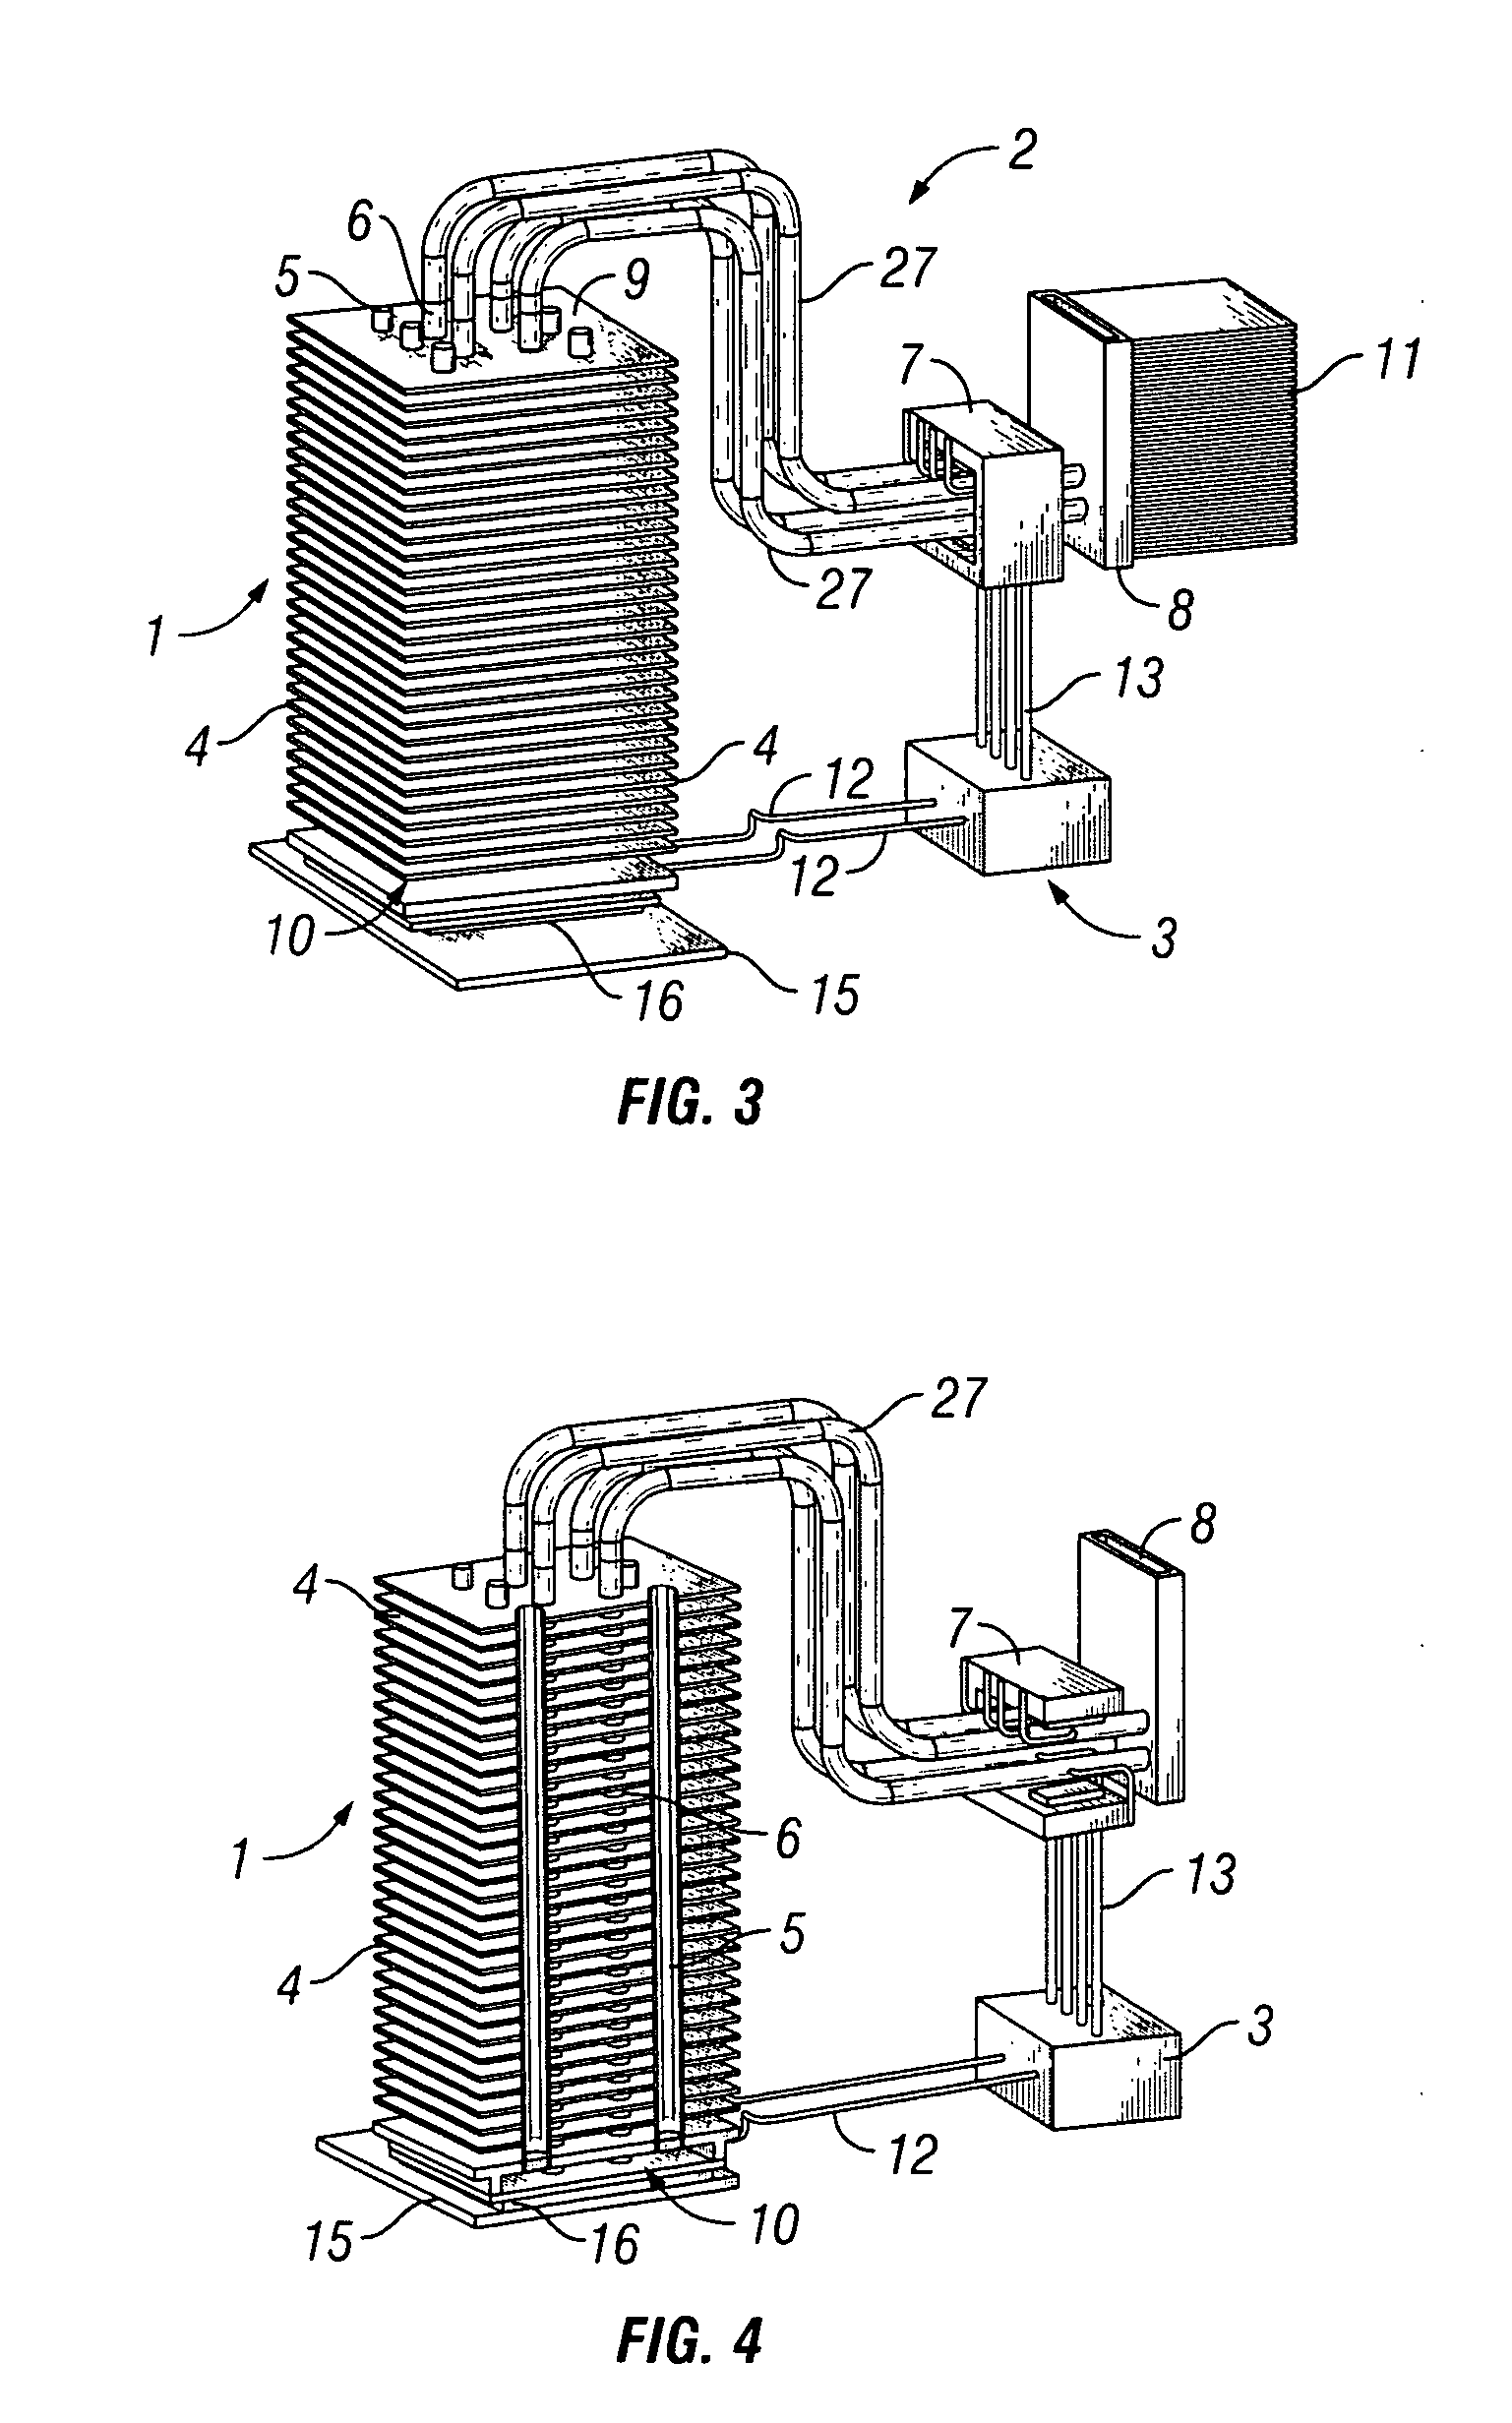 Intelligent cooling method combining passive and active cooling components